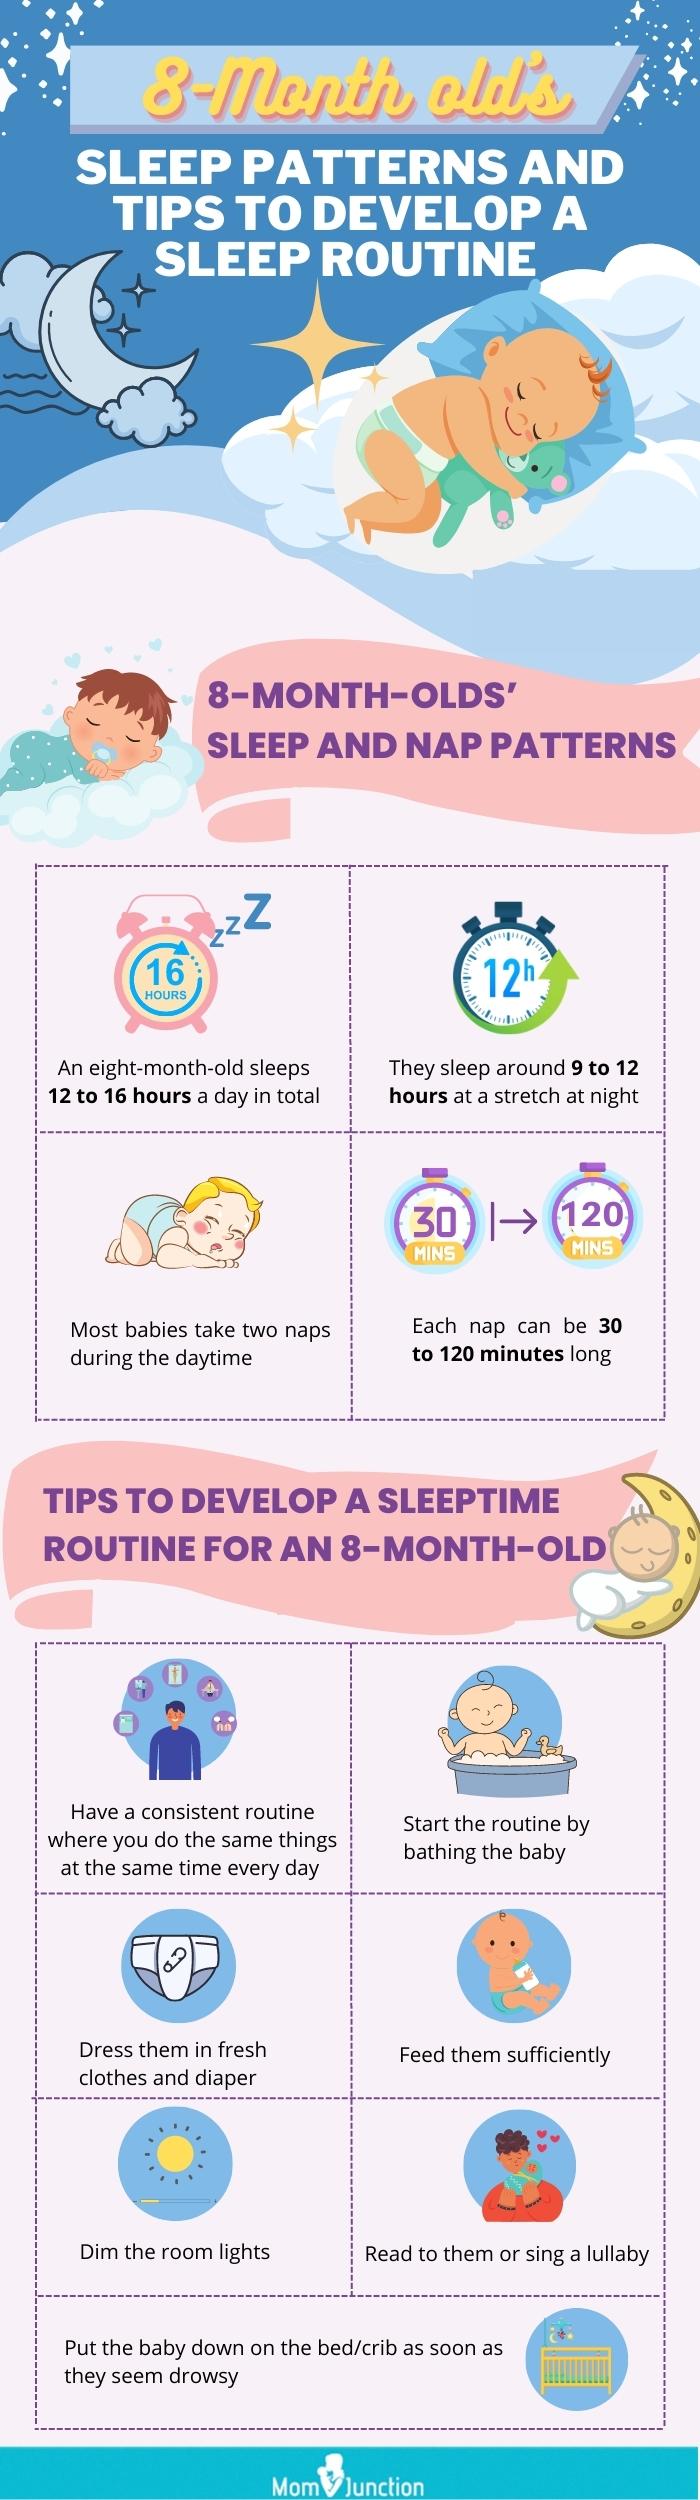 8 month olds sleep patterns and sleep routine [infographic]